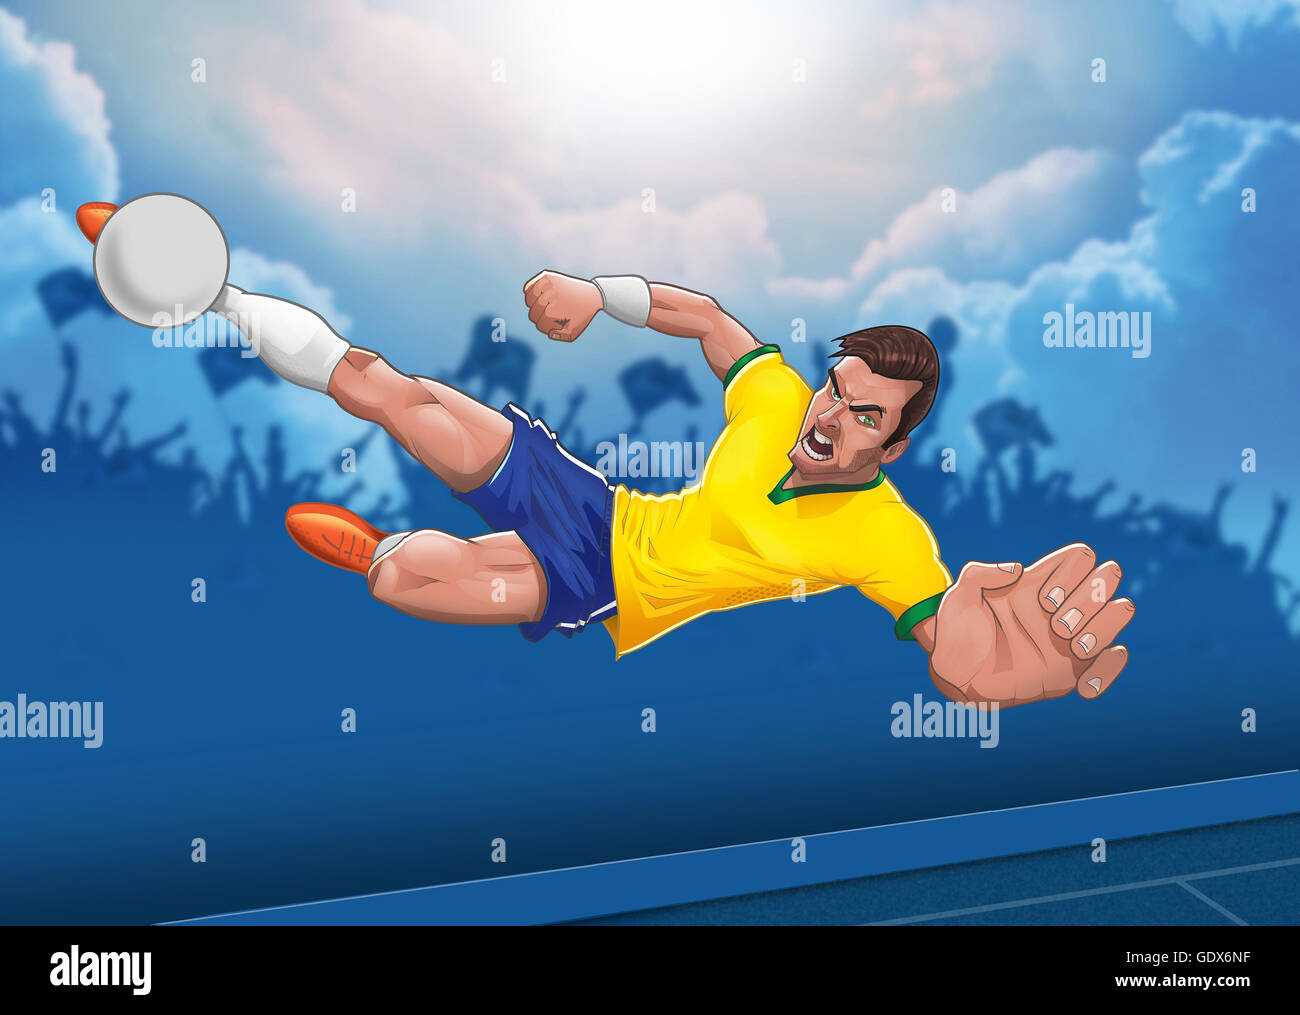 Determined football player executes air born horizontal scissors kick against  blue cloudy sky background illustration Stock Photo